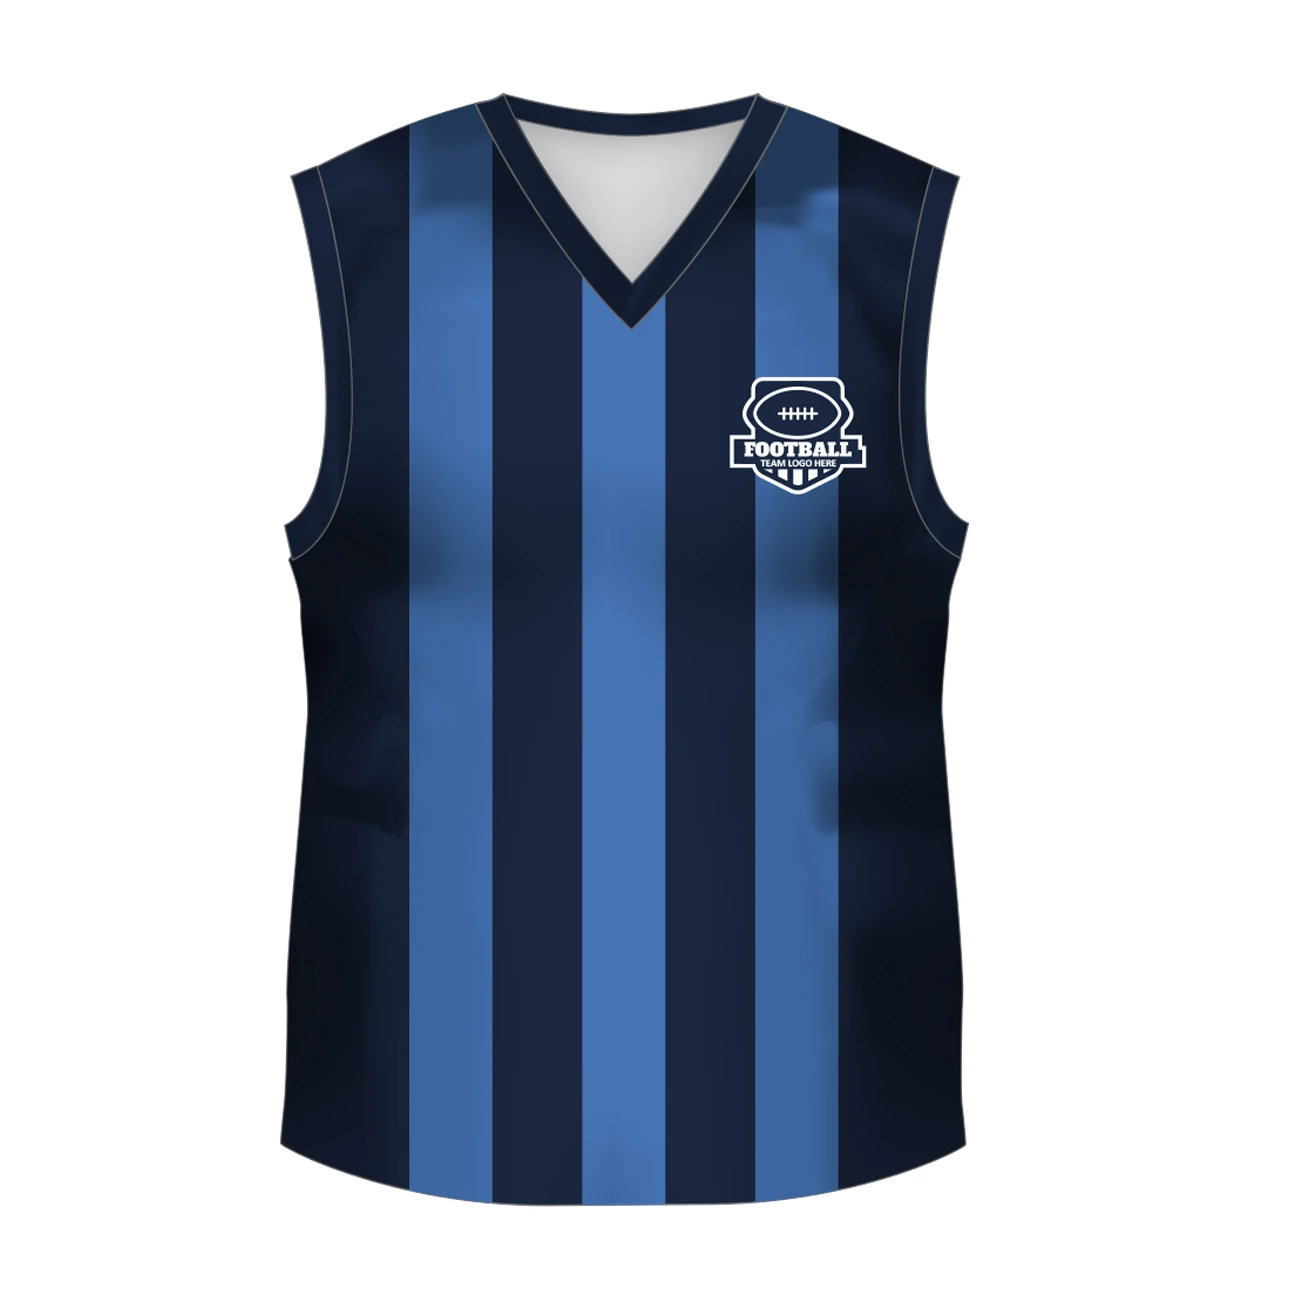 New Sublimated AFL Jersey